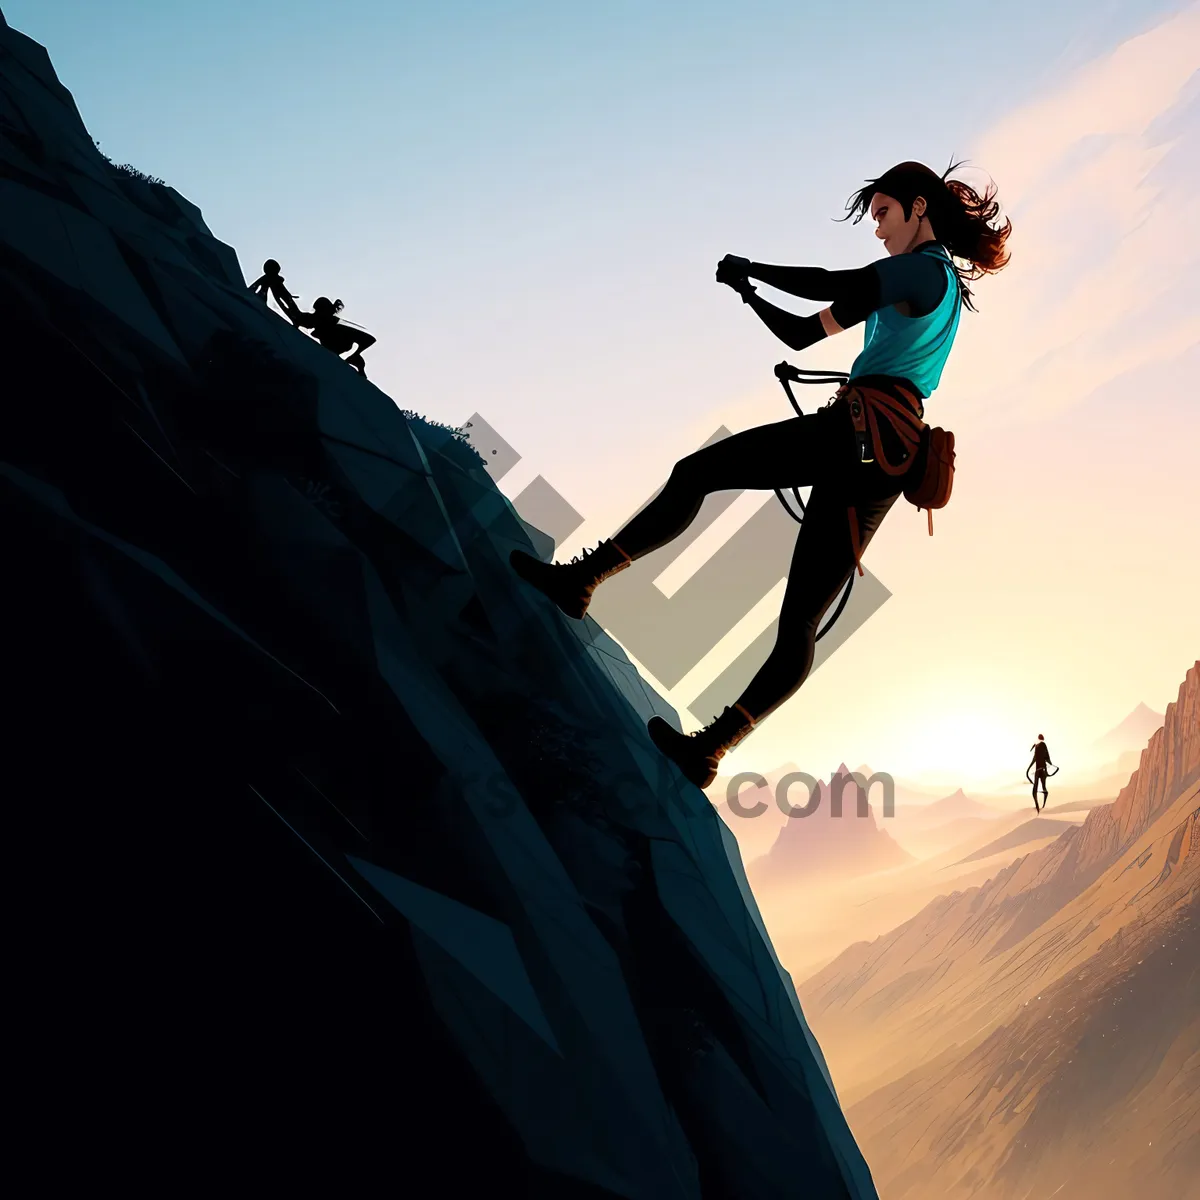 Picture of Adrenaline-Pumped Mountain Climber Scaling Majestic Summit